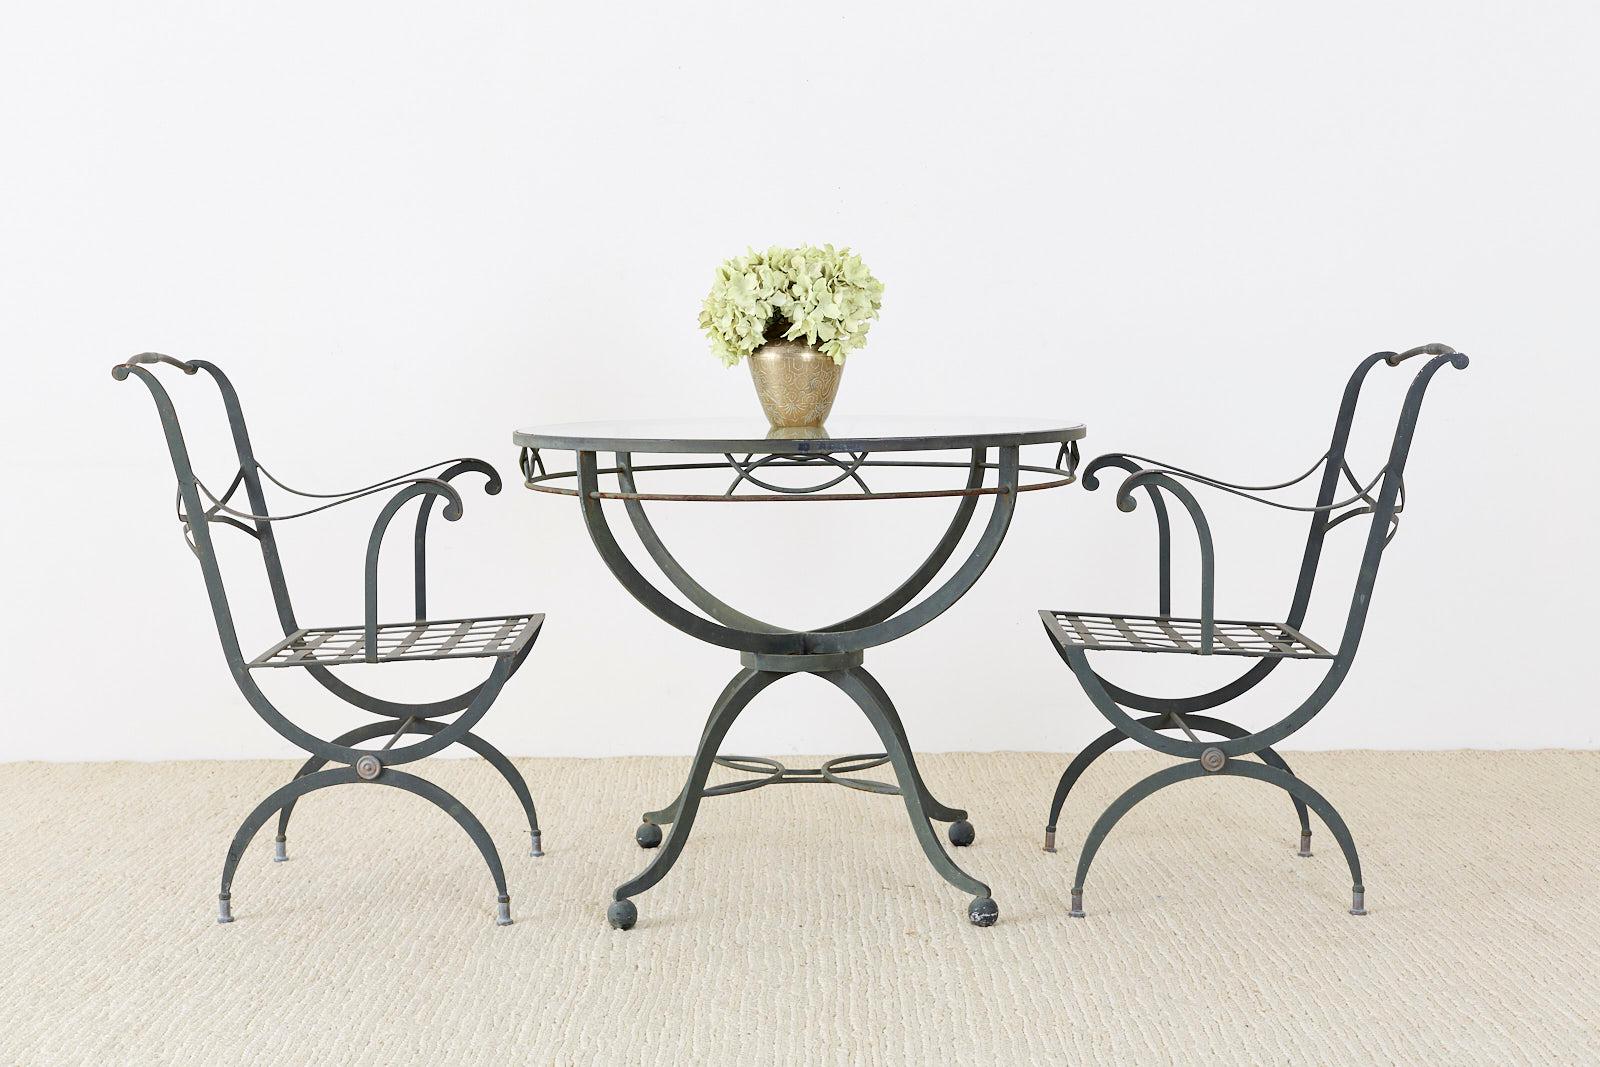 Unique Mid-Century Modern French garden or patio dining table constructed from iron with a beautiful patinated metal finish. The round top is inset with a pane of glass and a decorative apron. The graceful legs are conjoined in the middle with a